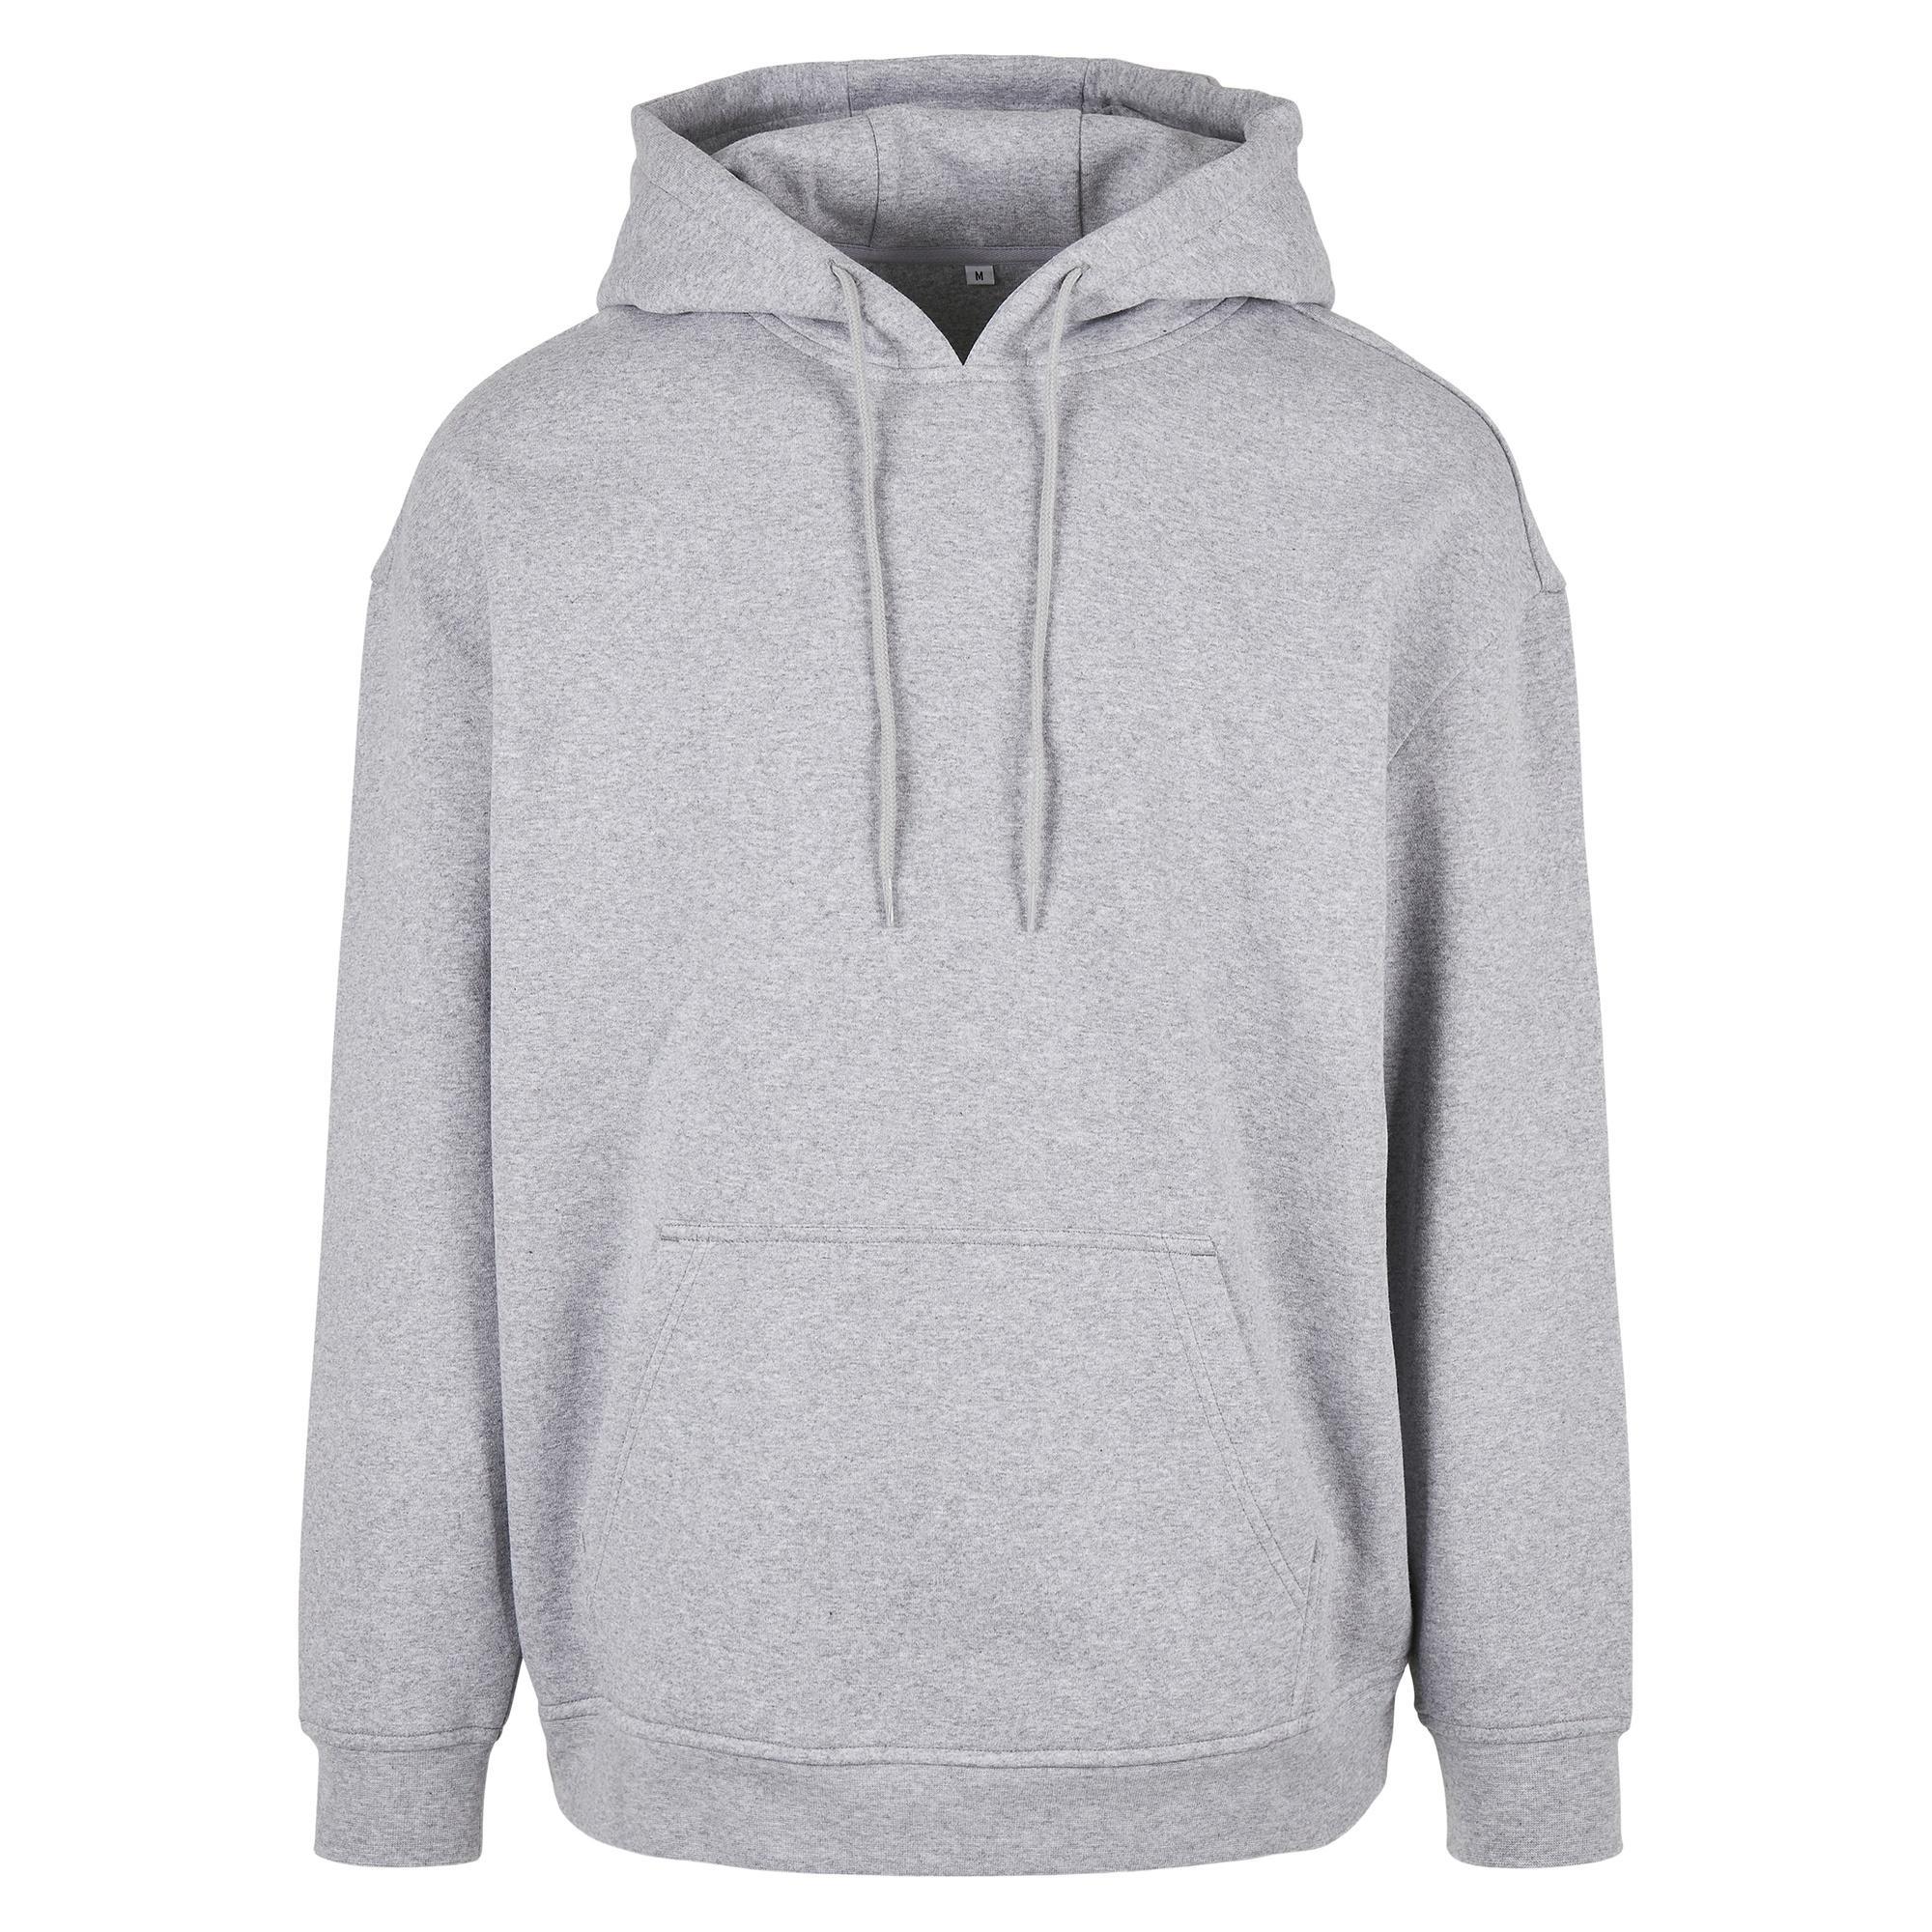 Build Your Brand Mens Basic Oversized Hoodie (Heather Grey) (XS)